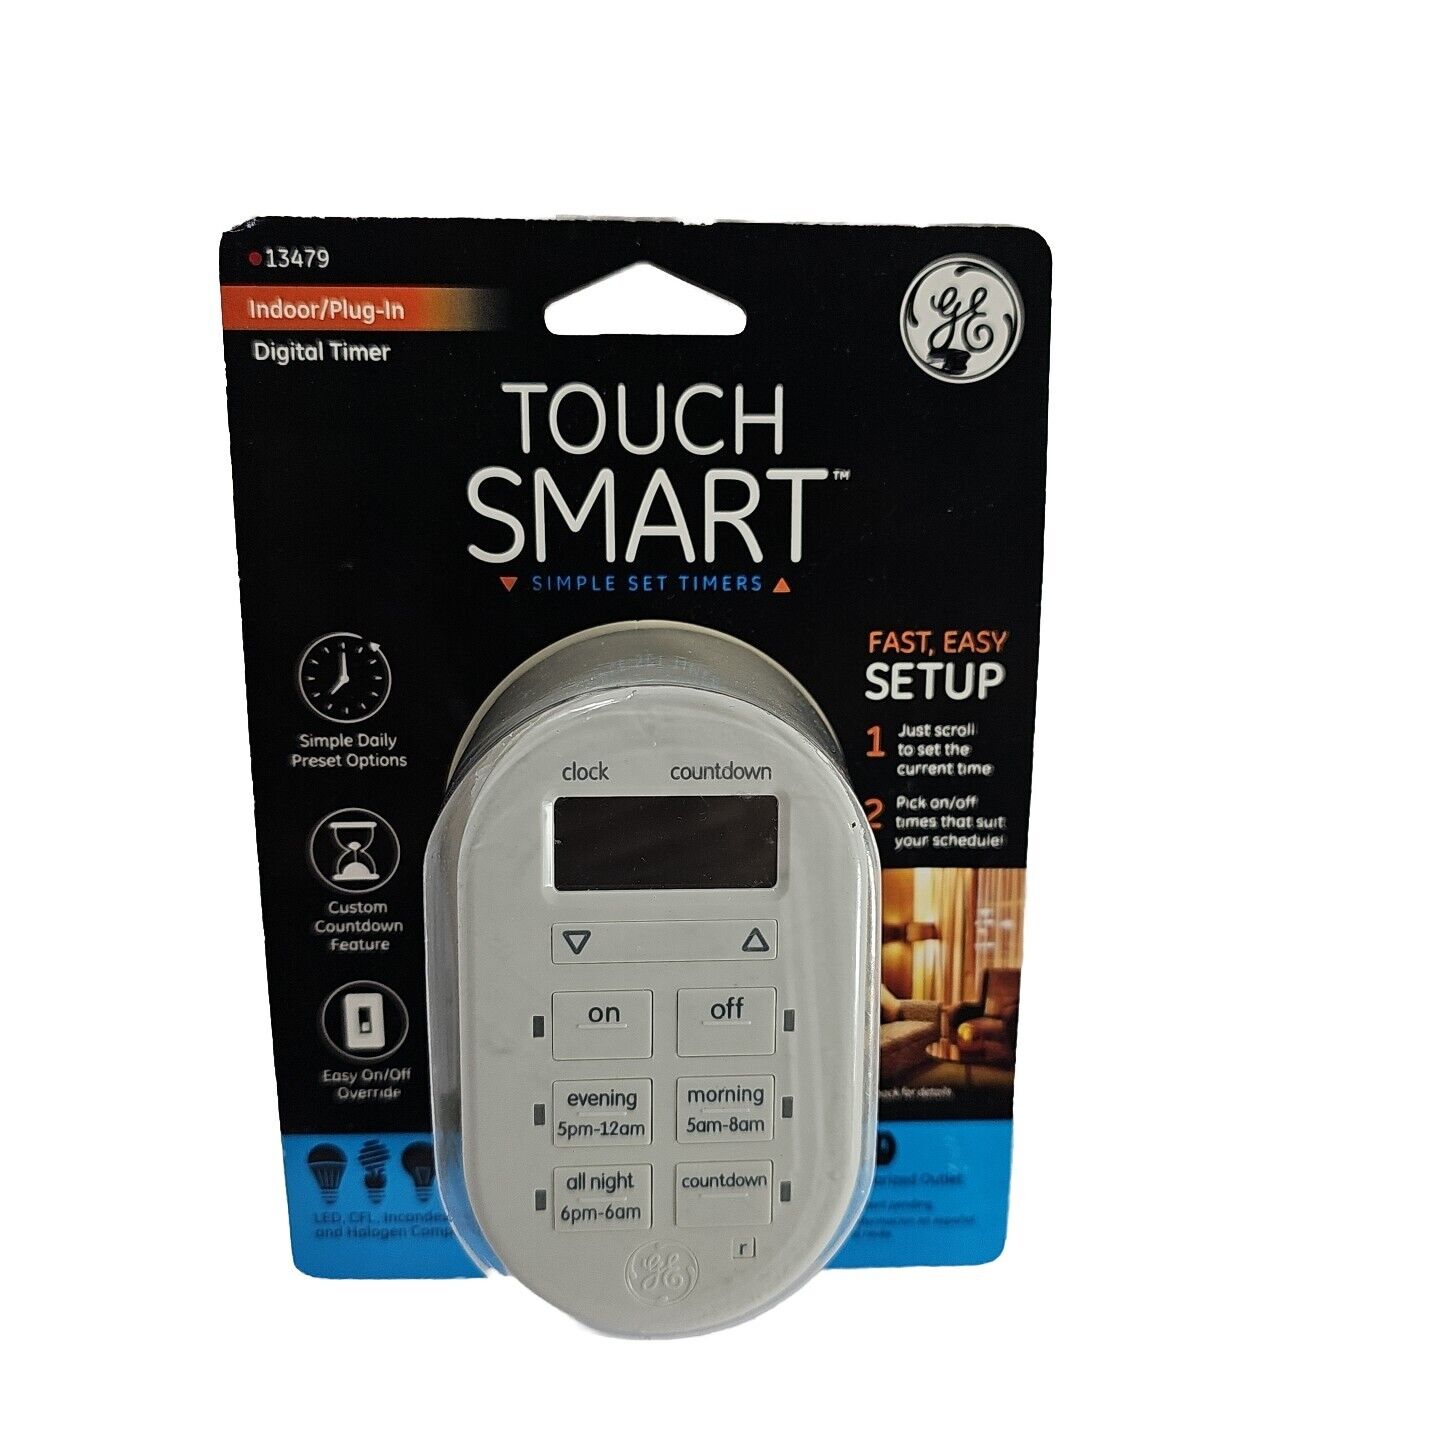 NEW GE DIGITAL TOUCH SMART TIMER INDOOR PLUG IN SINGLE POLARIZED 13479 Brand New